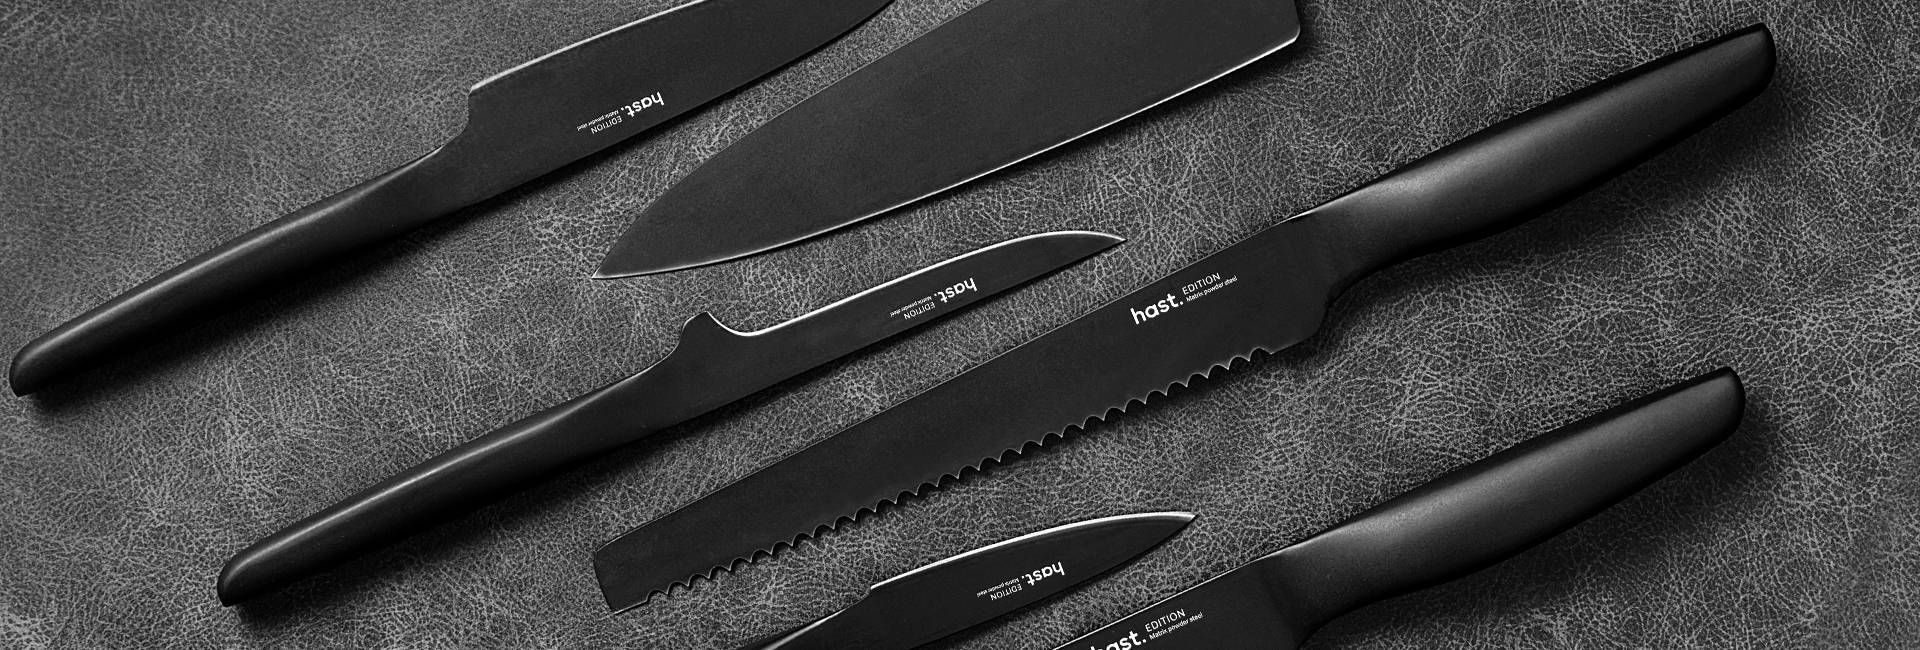 Hast knives